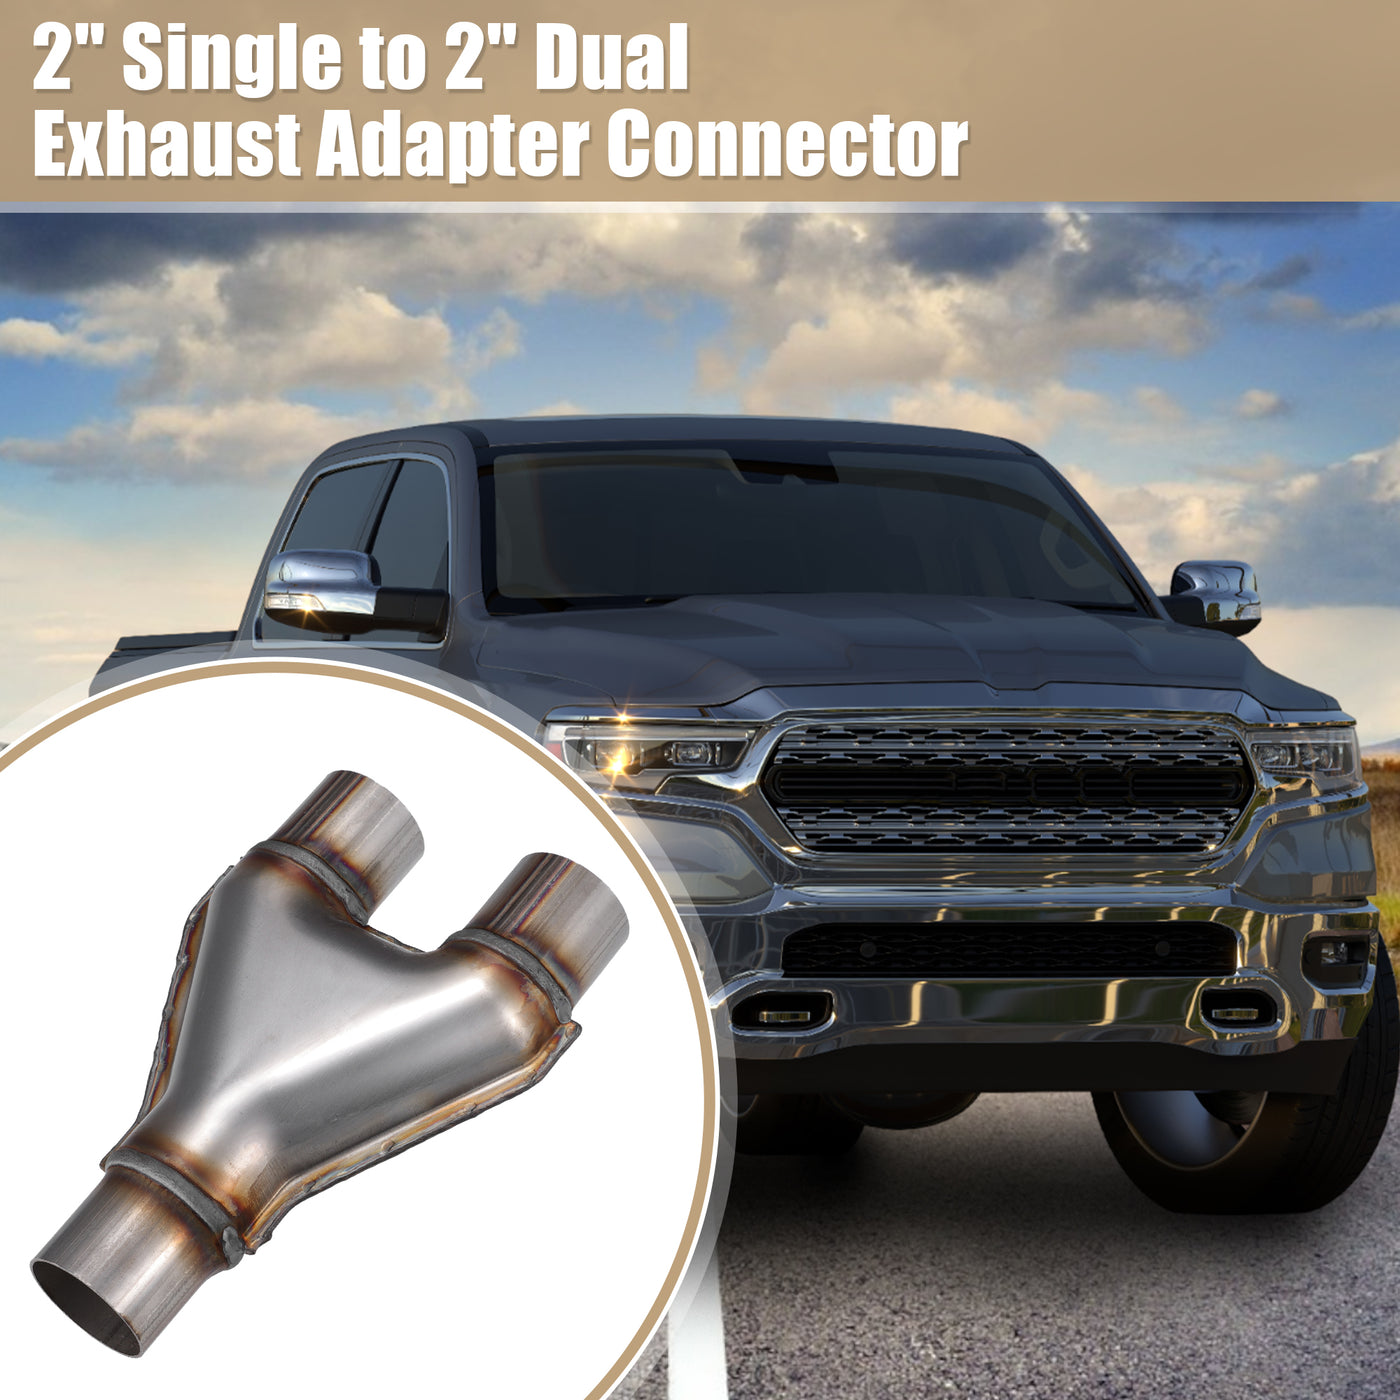 X AUTOHAUX Universal 409 Stainless Steel Exhaust Y Pipe 2" Single to 2" Dual Exhaust Adapter Connector 10" Overall Length for Car Truck